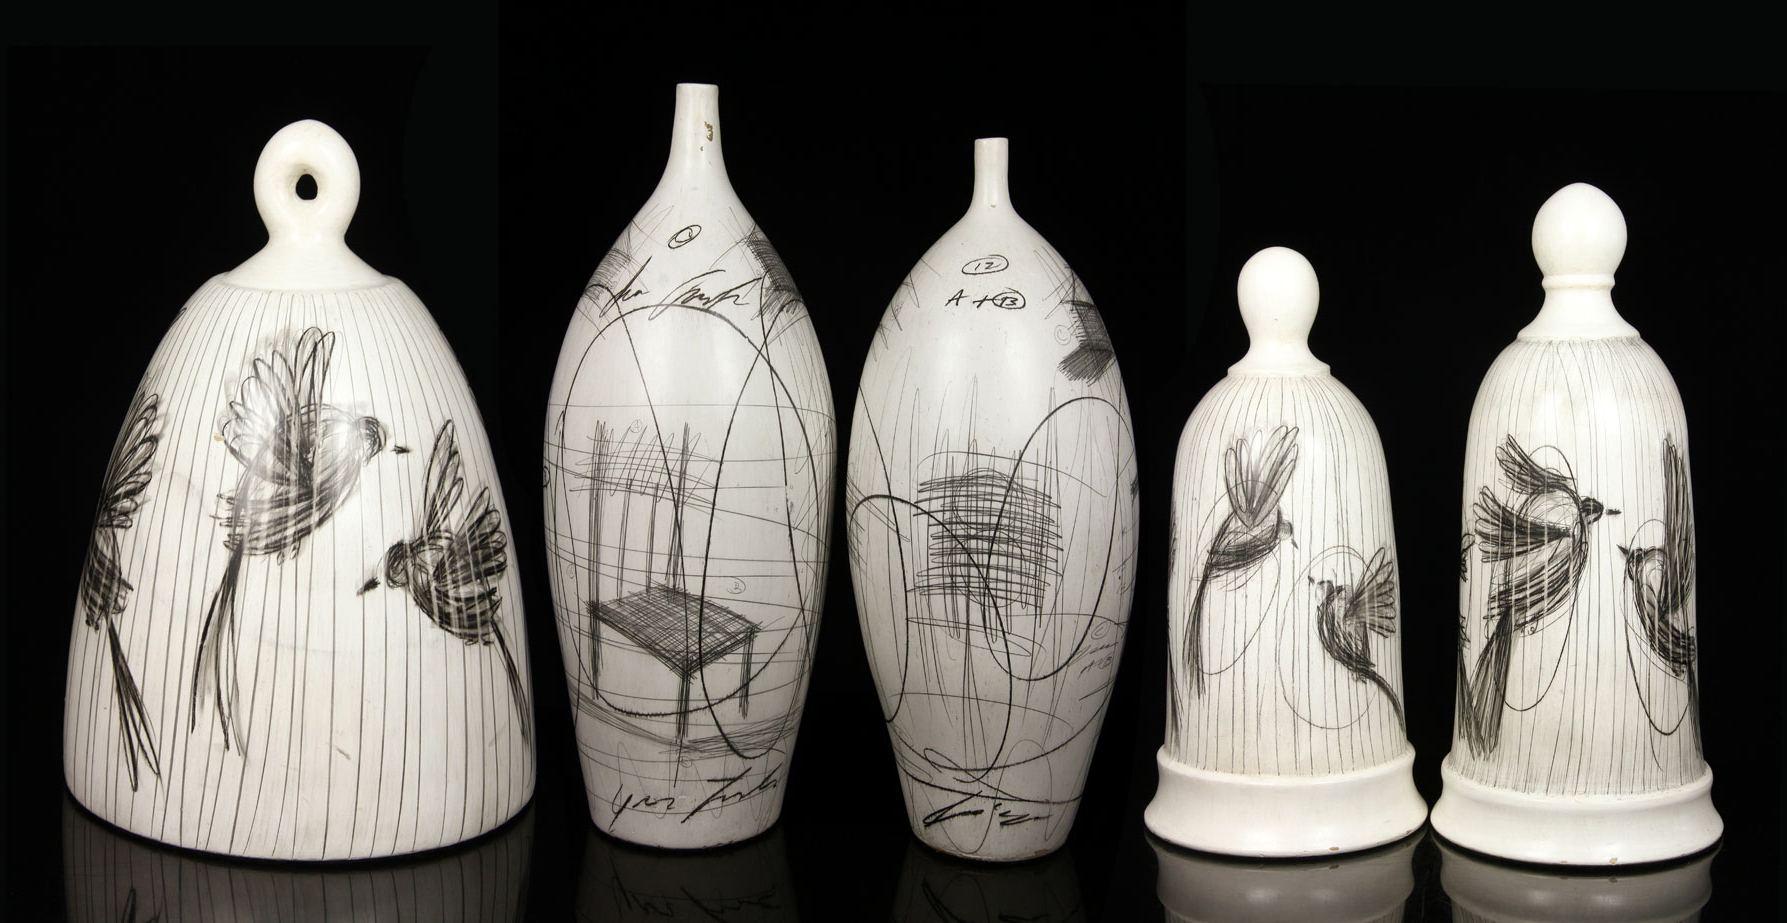 Group of five large mid-century Italian glazed pottery vases, signed ‘Zabcos,’ the tallest standing 24 inches high. Estimate: $3,000-$5,000. Kaminski Auctions image